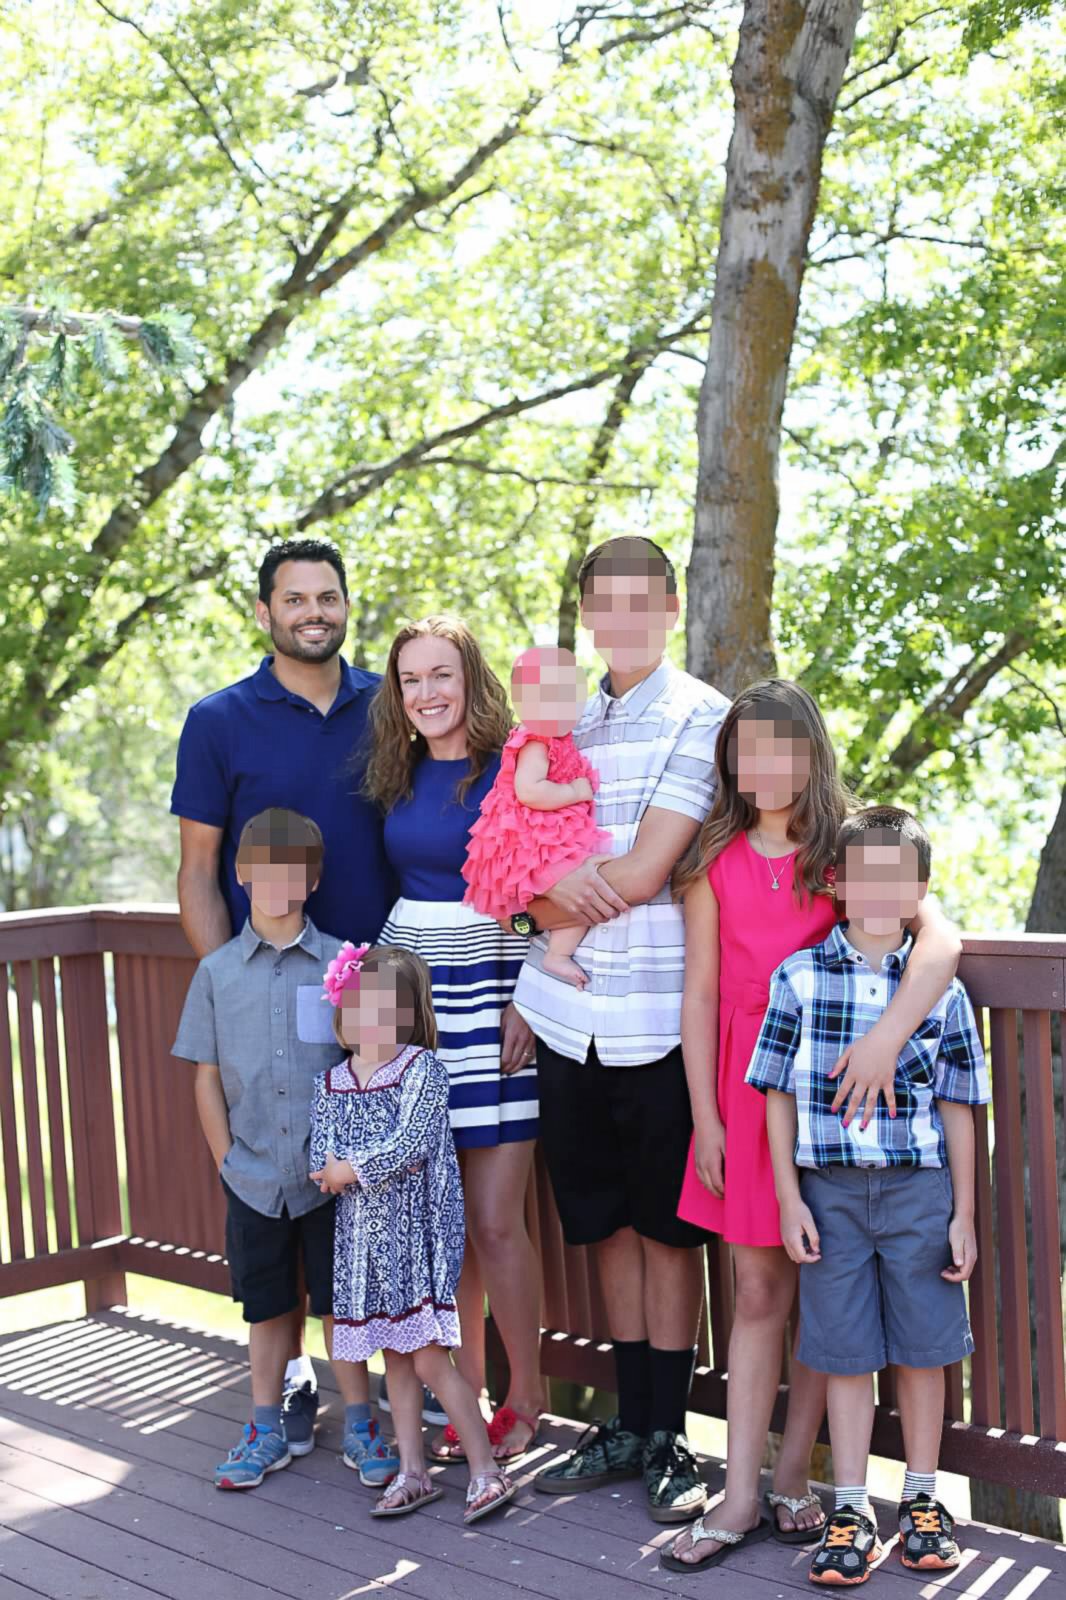 PHOTO: Michael Wetzel, a father of six, was reportedly killed in the San Bernardino shooting yesterday.